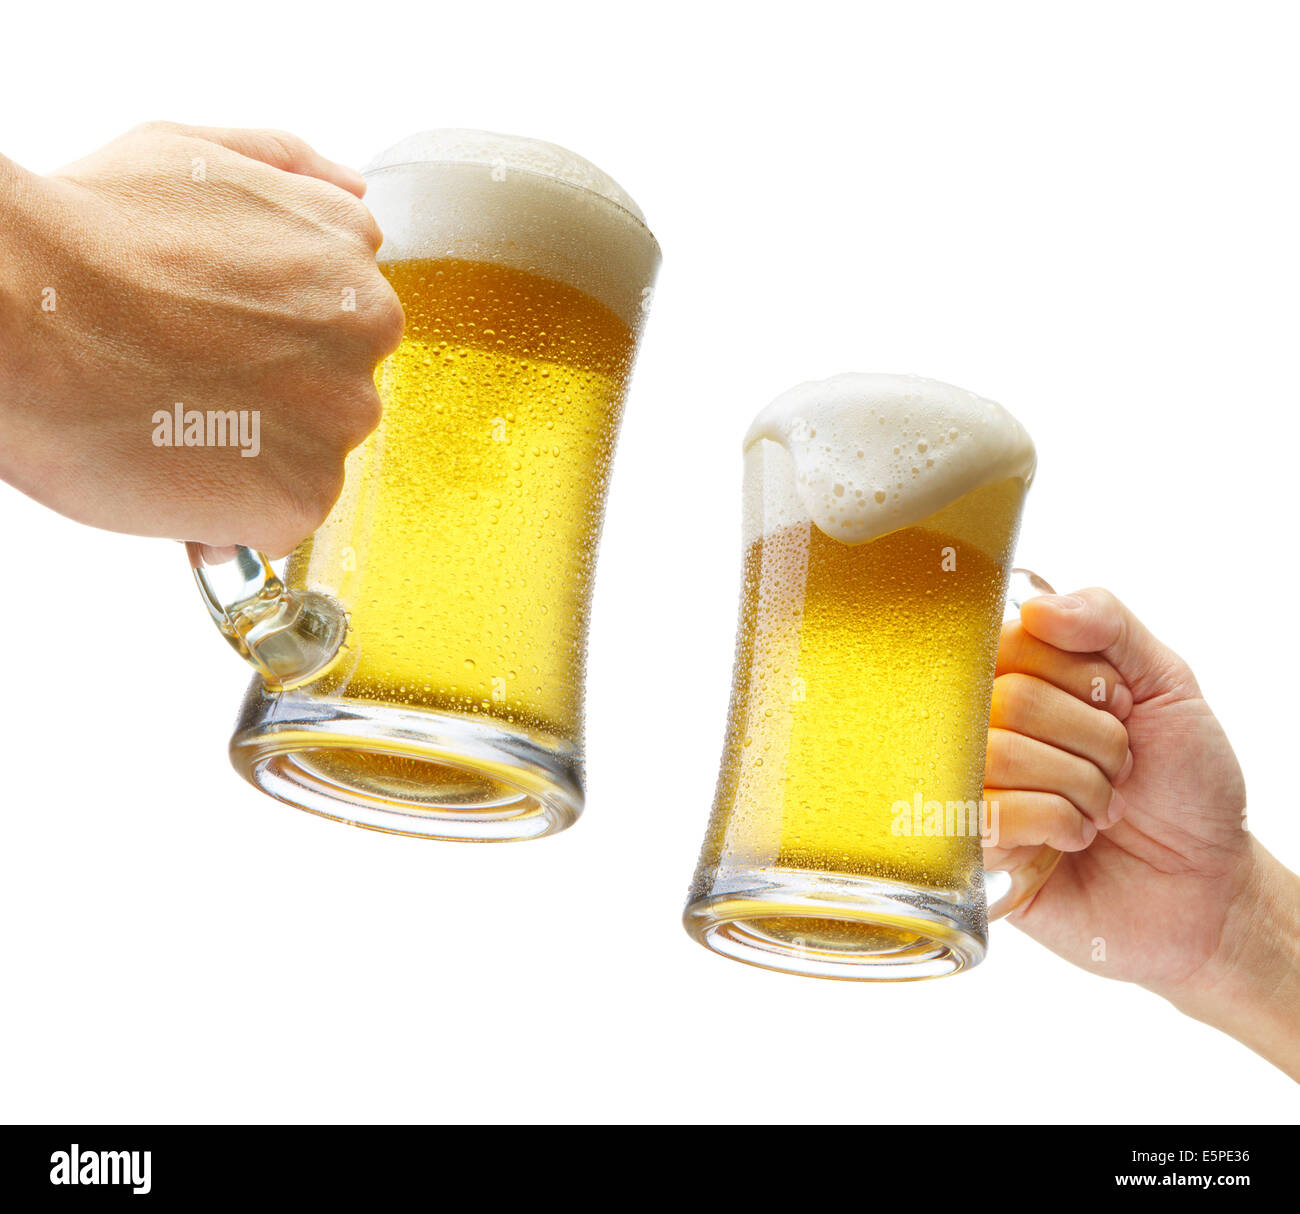 two hands holding beers making a toast Stock Photo